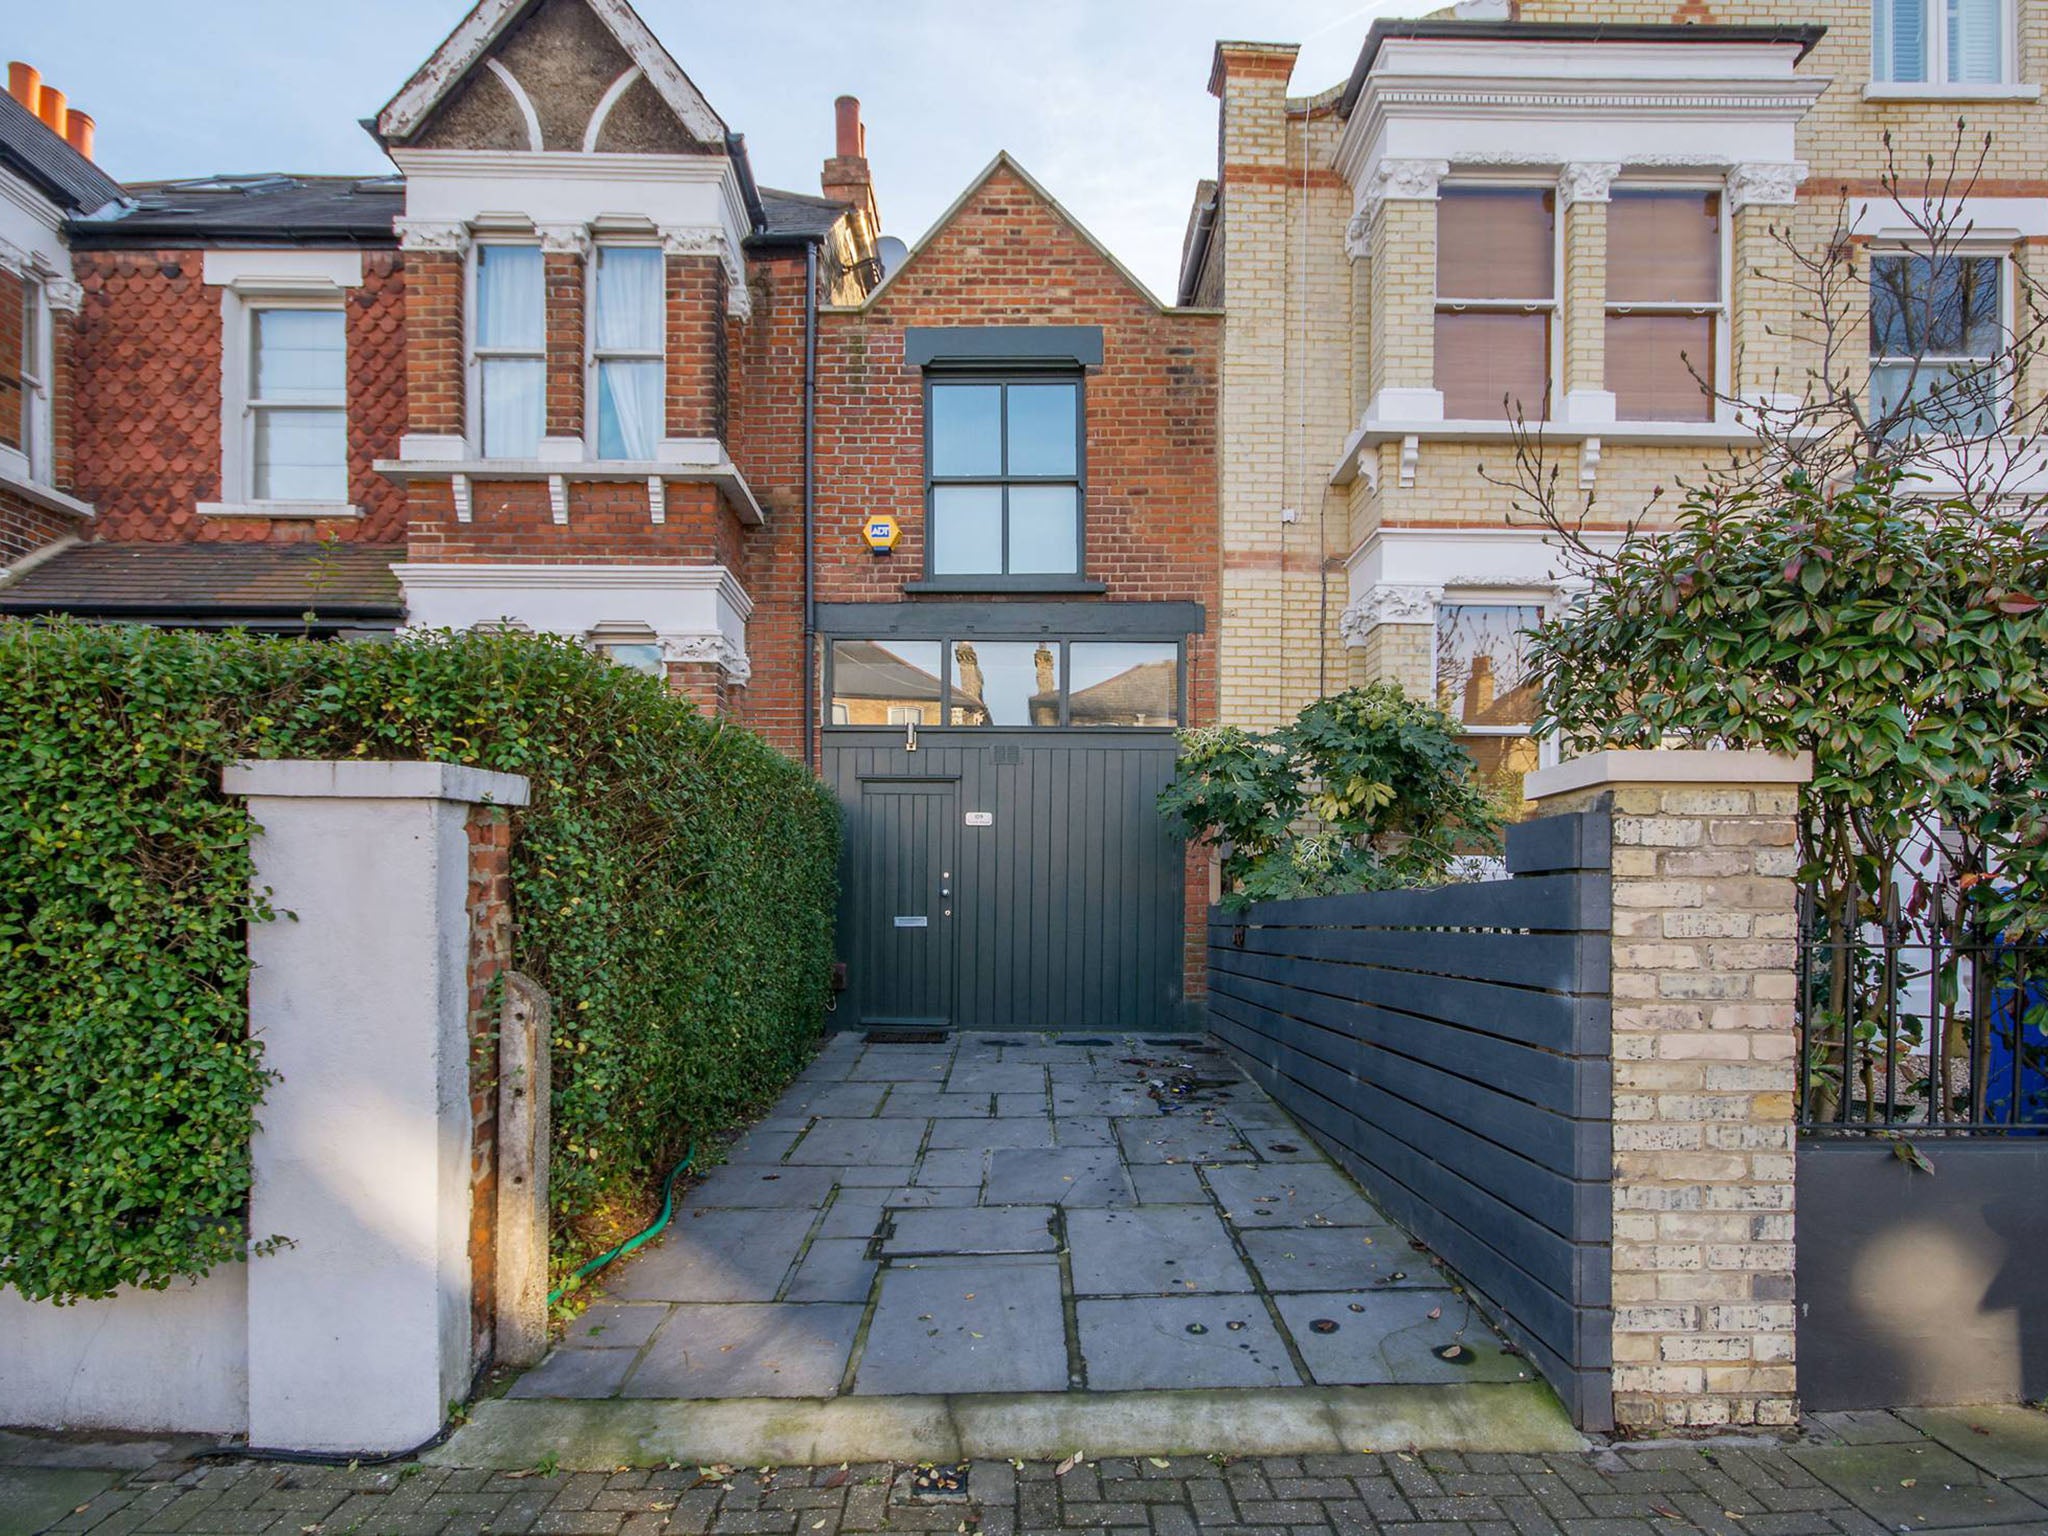 This property in Barry Road is as expensive as it is narrow